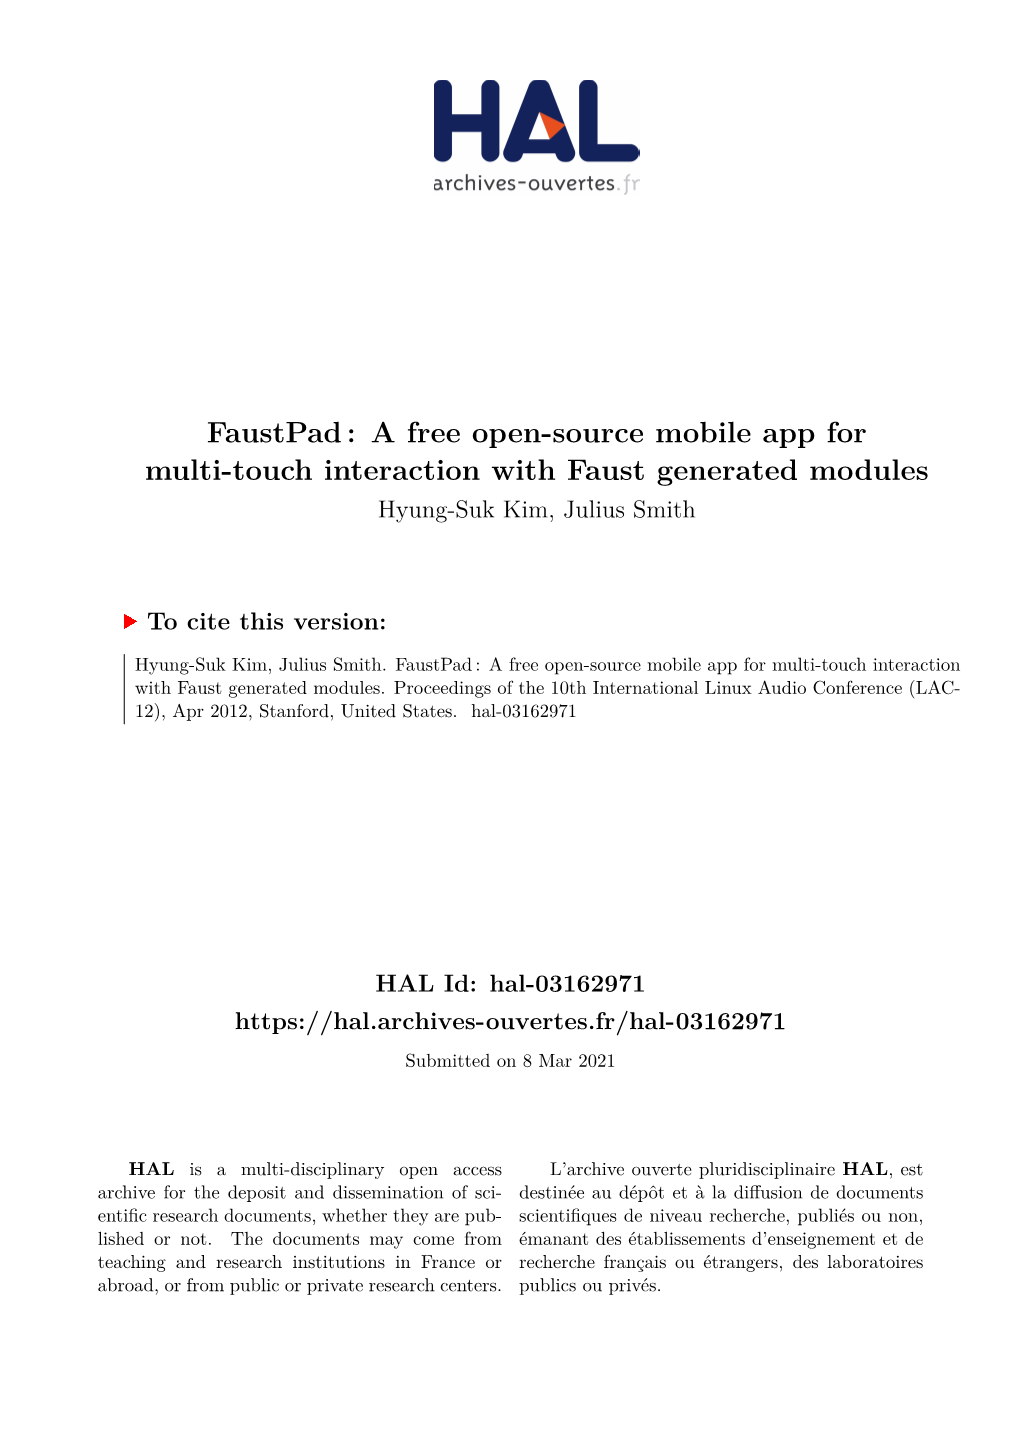 A Free Open-Source Mobile App for Multi-Touch Interaction with Faust Generated Modules Hyung-Suk Kim, Julius Smith